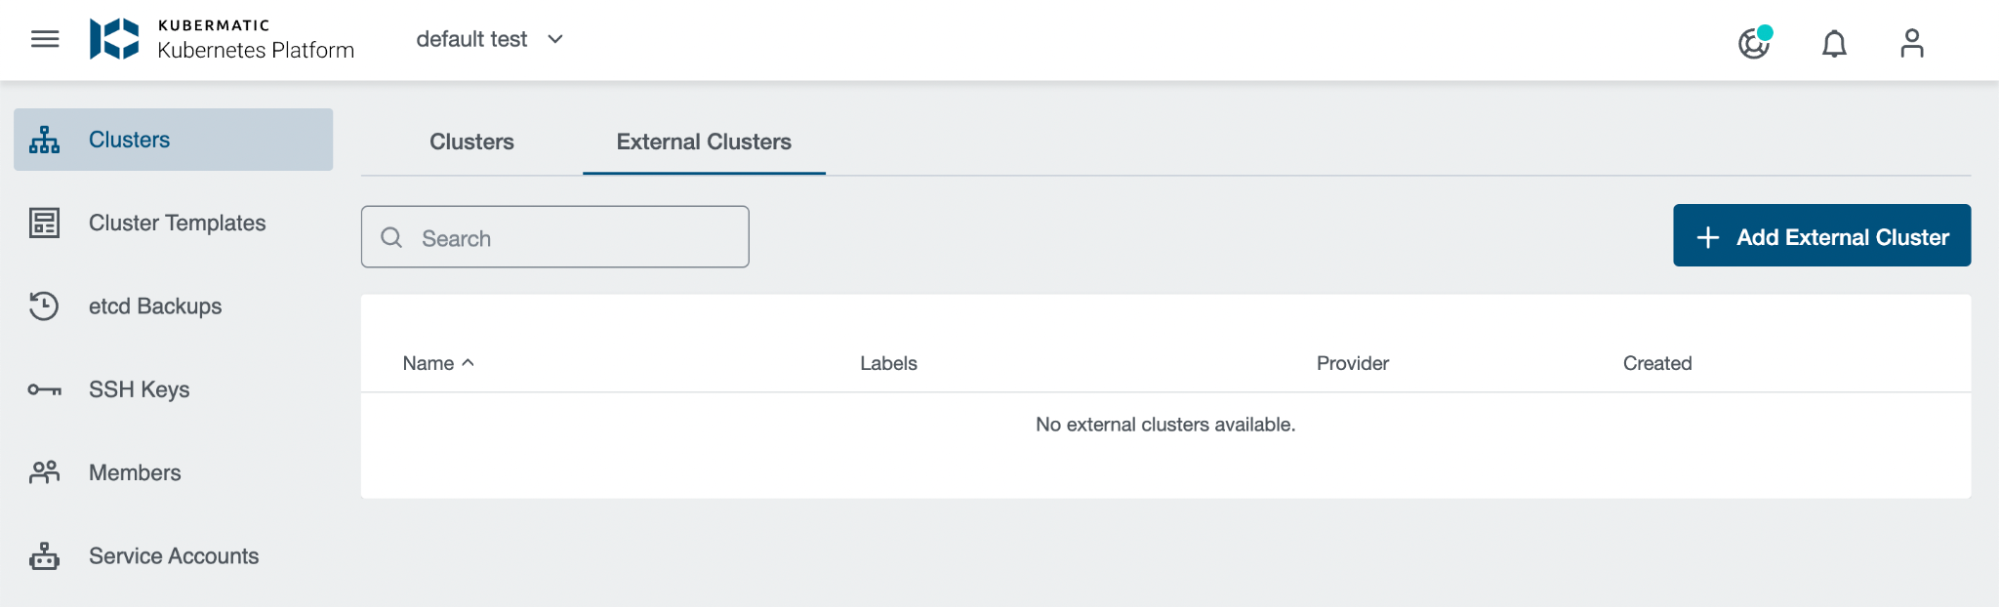 Adding external clusters to the KKP dashboard